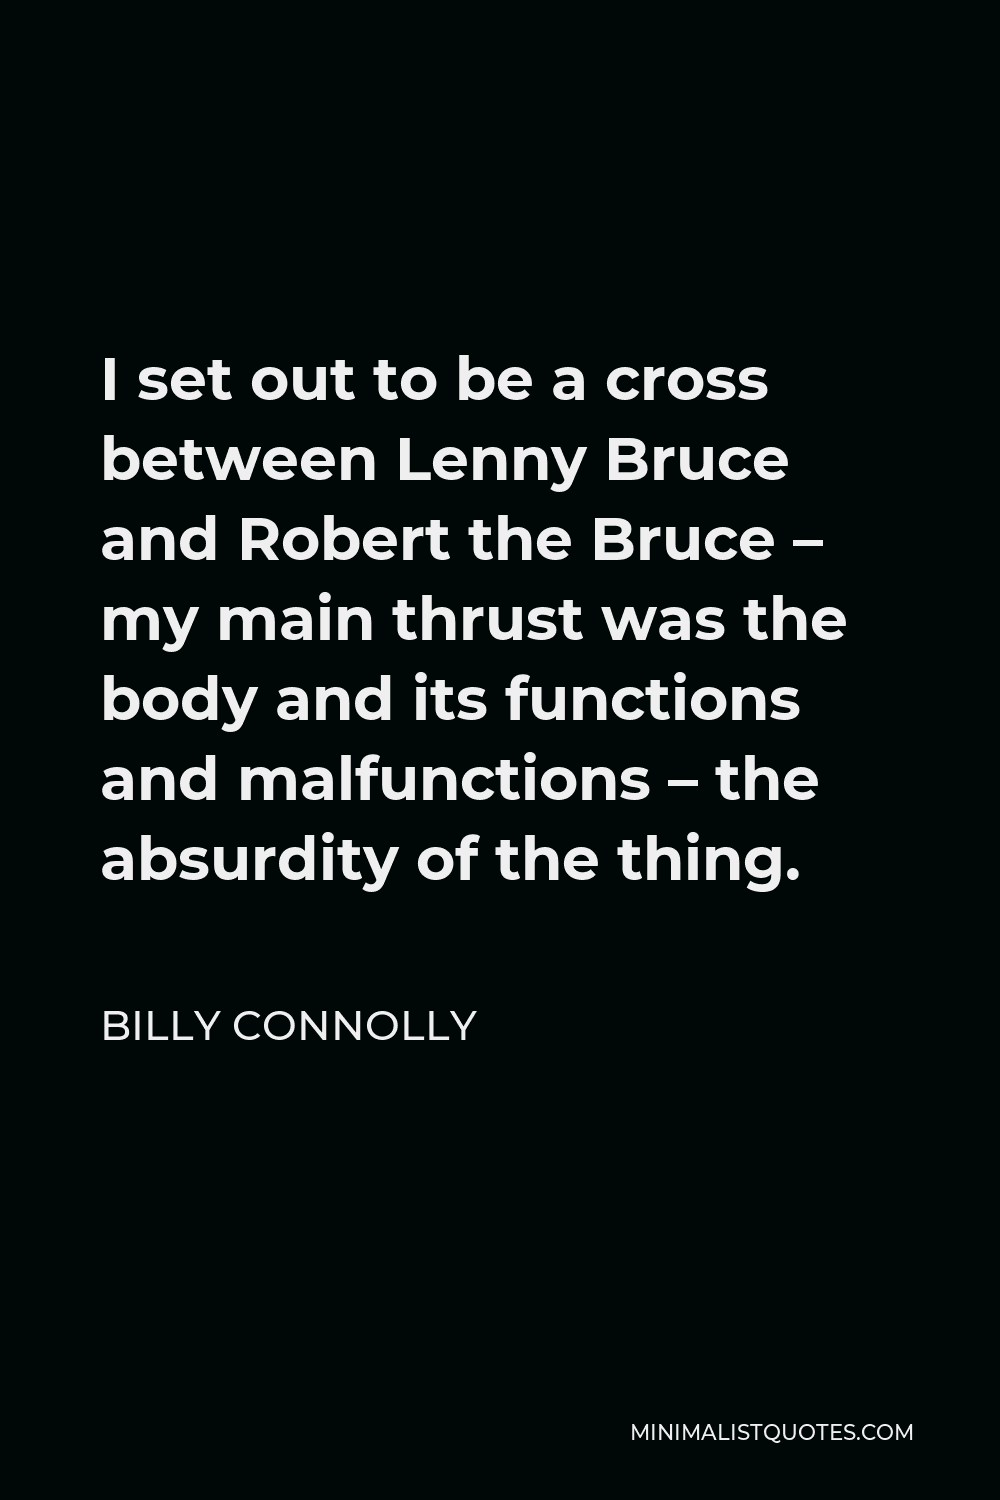 Billy Connolly Quote - I set out to be a cross between Lenny Bruce and Robert the Bruce – my main thrust was the body and its functions and malfunctions – the absurdity of the thing.